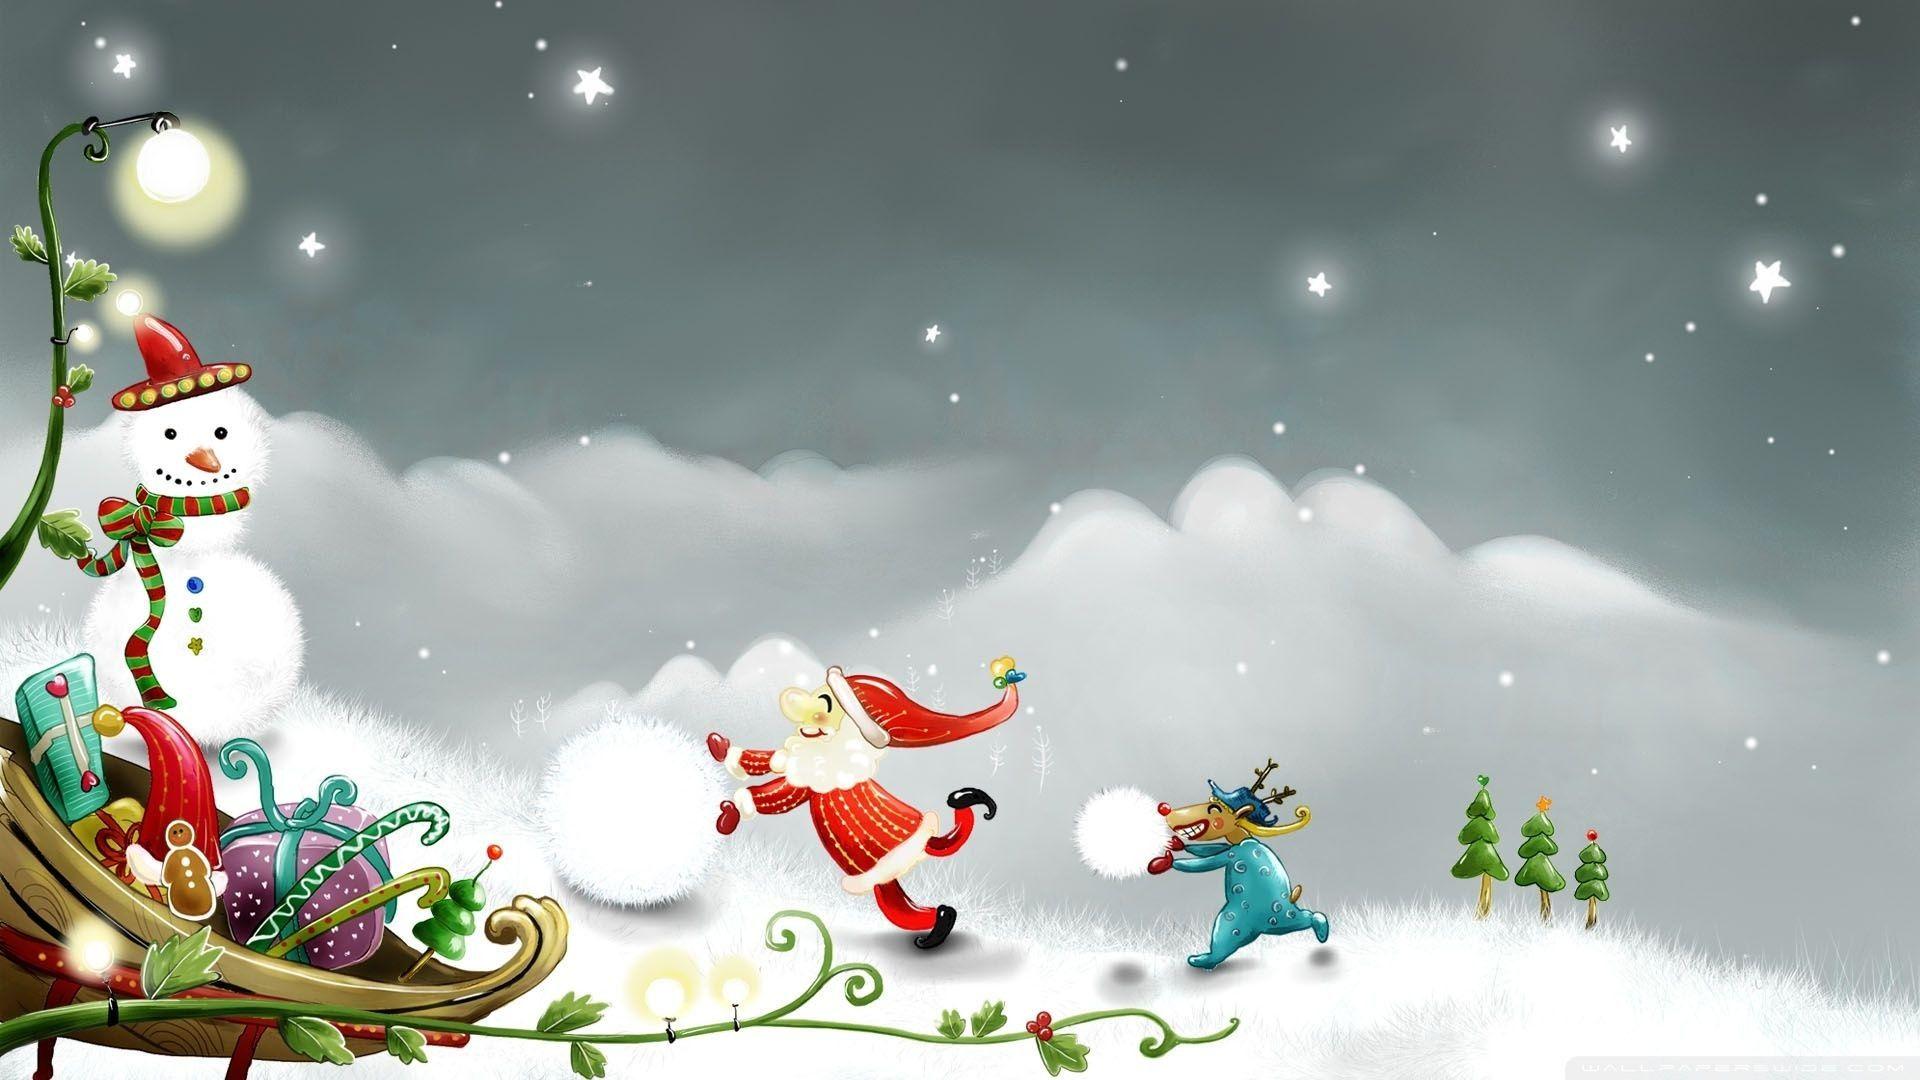 Christmas Countdown Wallpaper For Desktop Free The Galleries